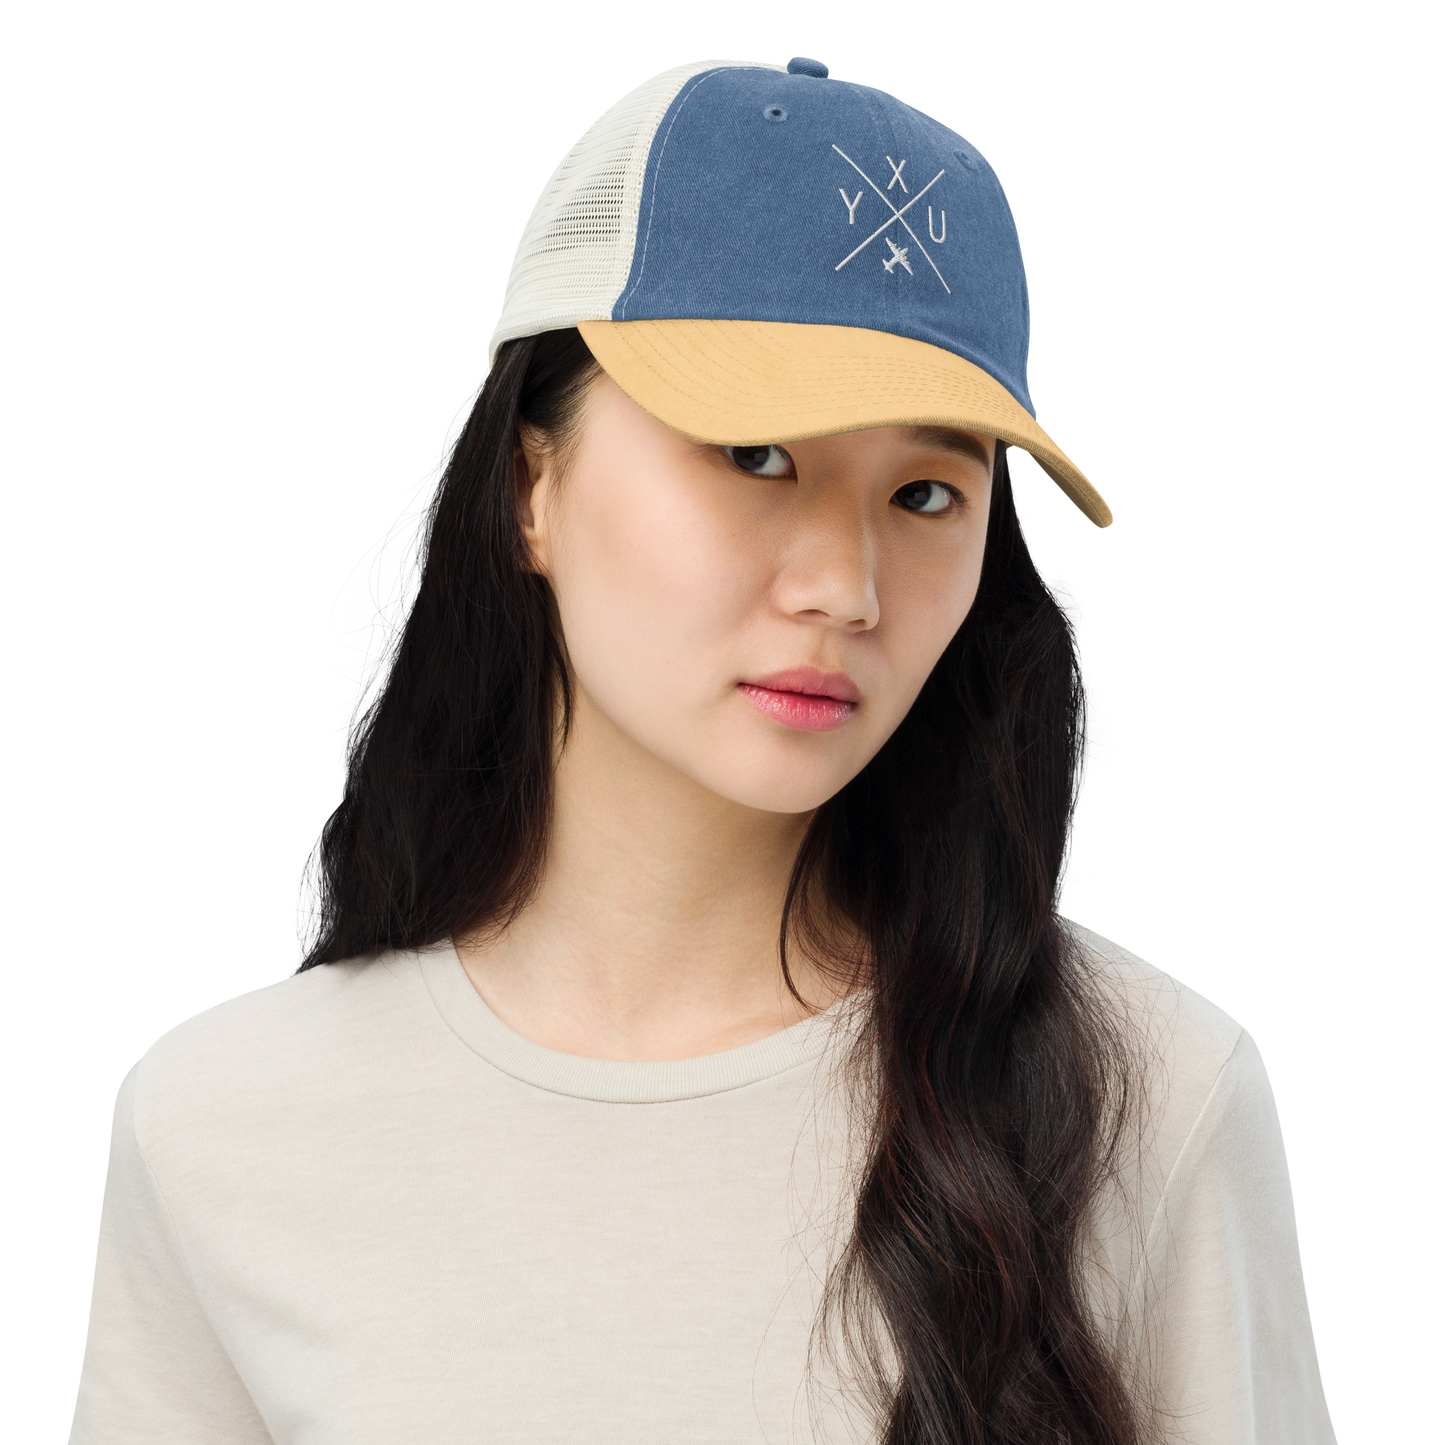 YHM Designs - YXU London Pigment-Dyed Trucker Cap - Crossed-X Design with Airport Code and Vintage Propliner - White Embroidery - Image 03